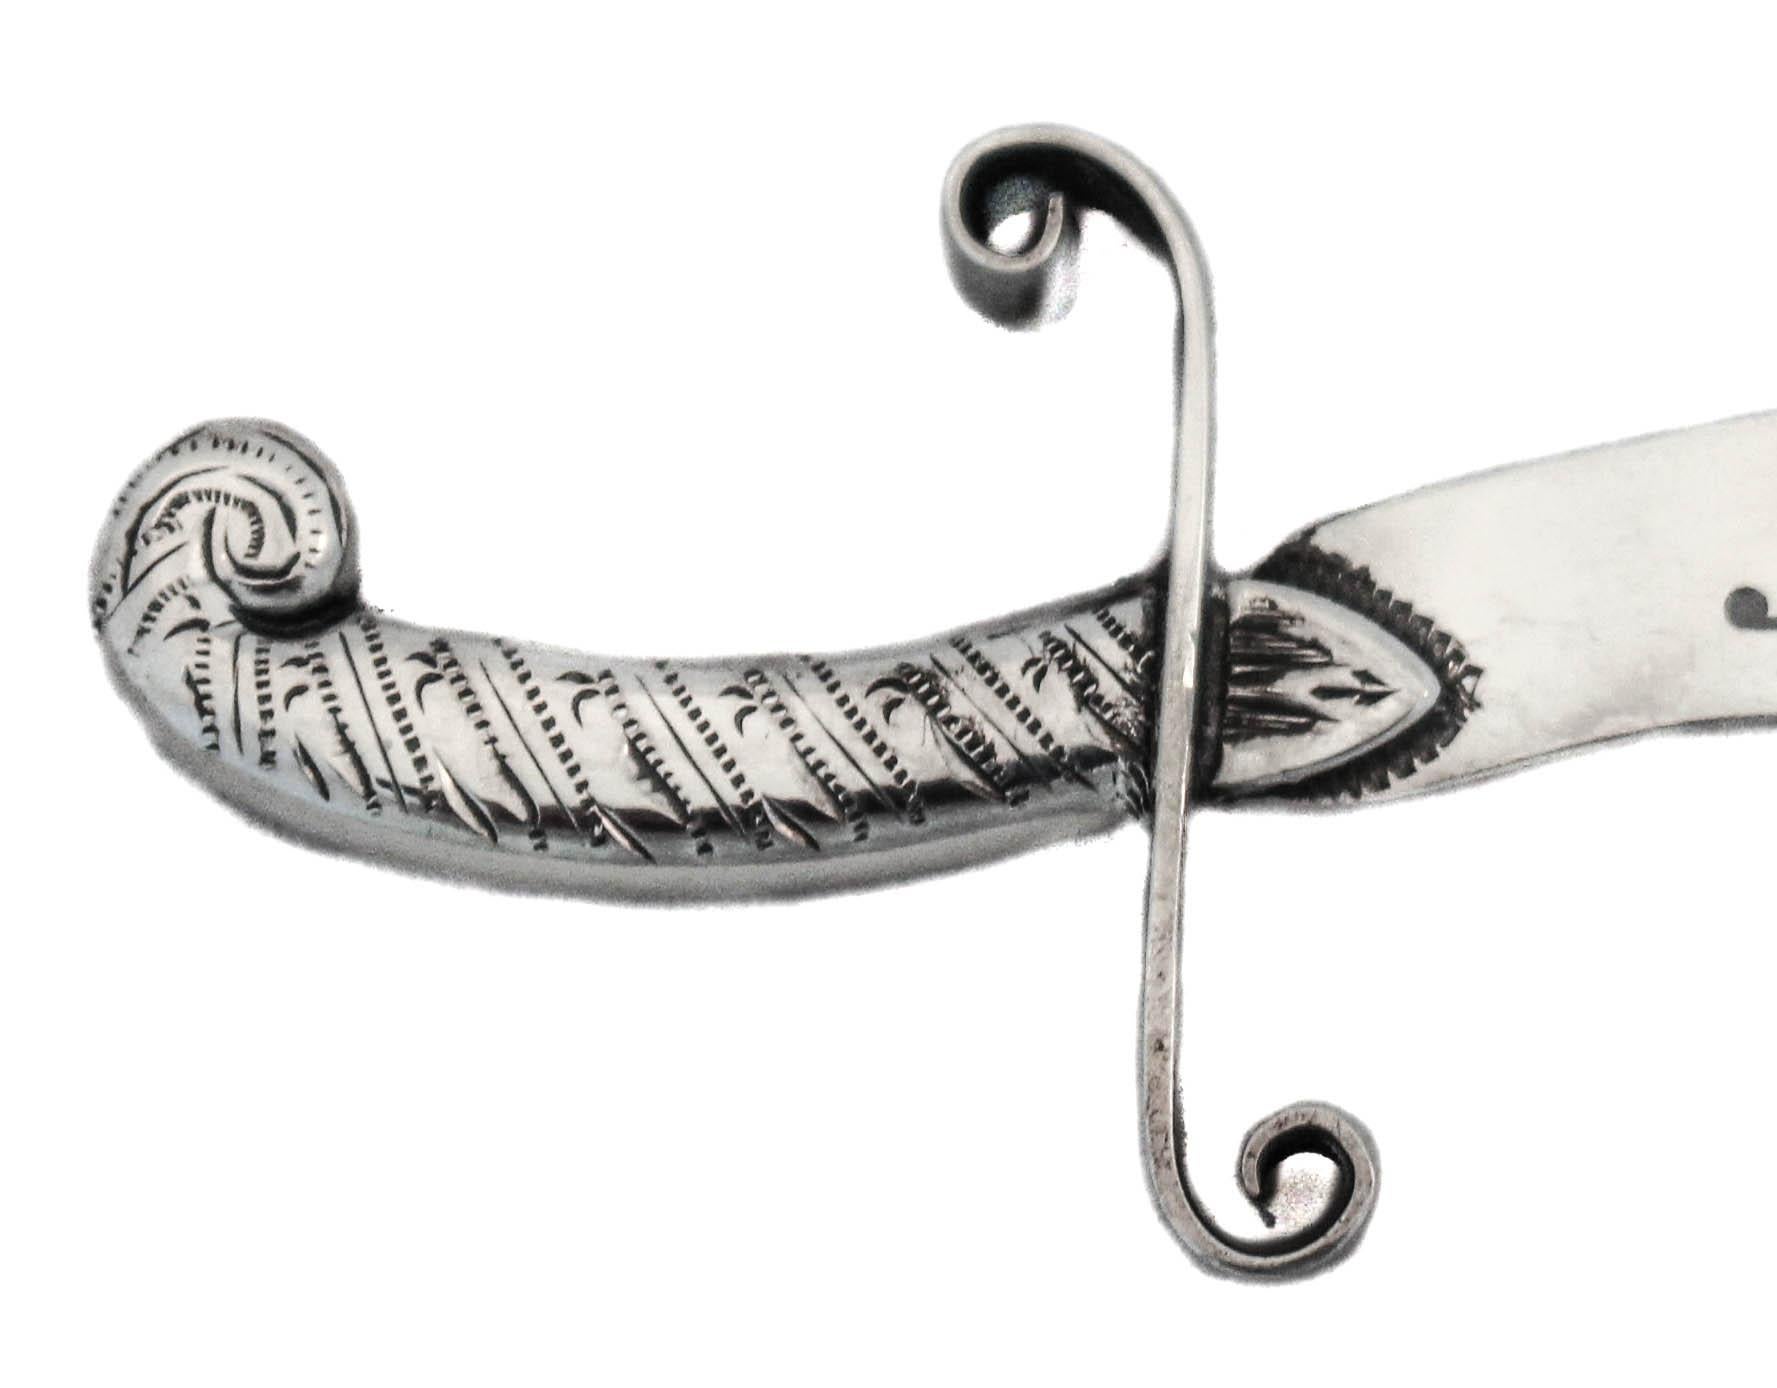 Being offered is an English sterling silver bookmark made by the “M. Bros Silver Co” of Birmingham, England (hallmarked 1887). 
The firm was founded in the 1870s by Charles Miller, George Miller and Richard Miller (hence “M. Brothers Company”). A